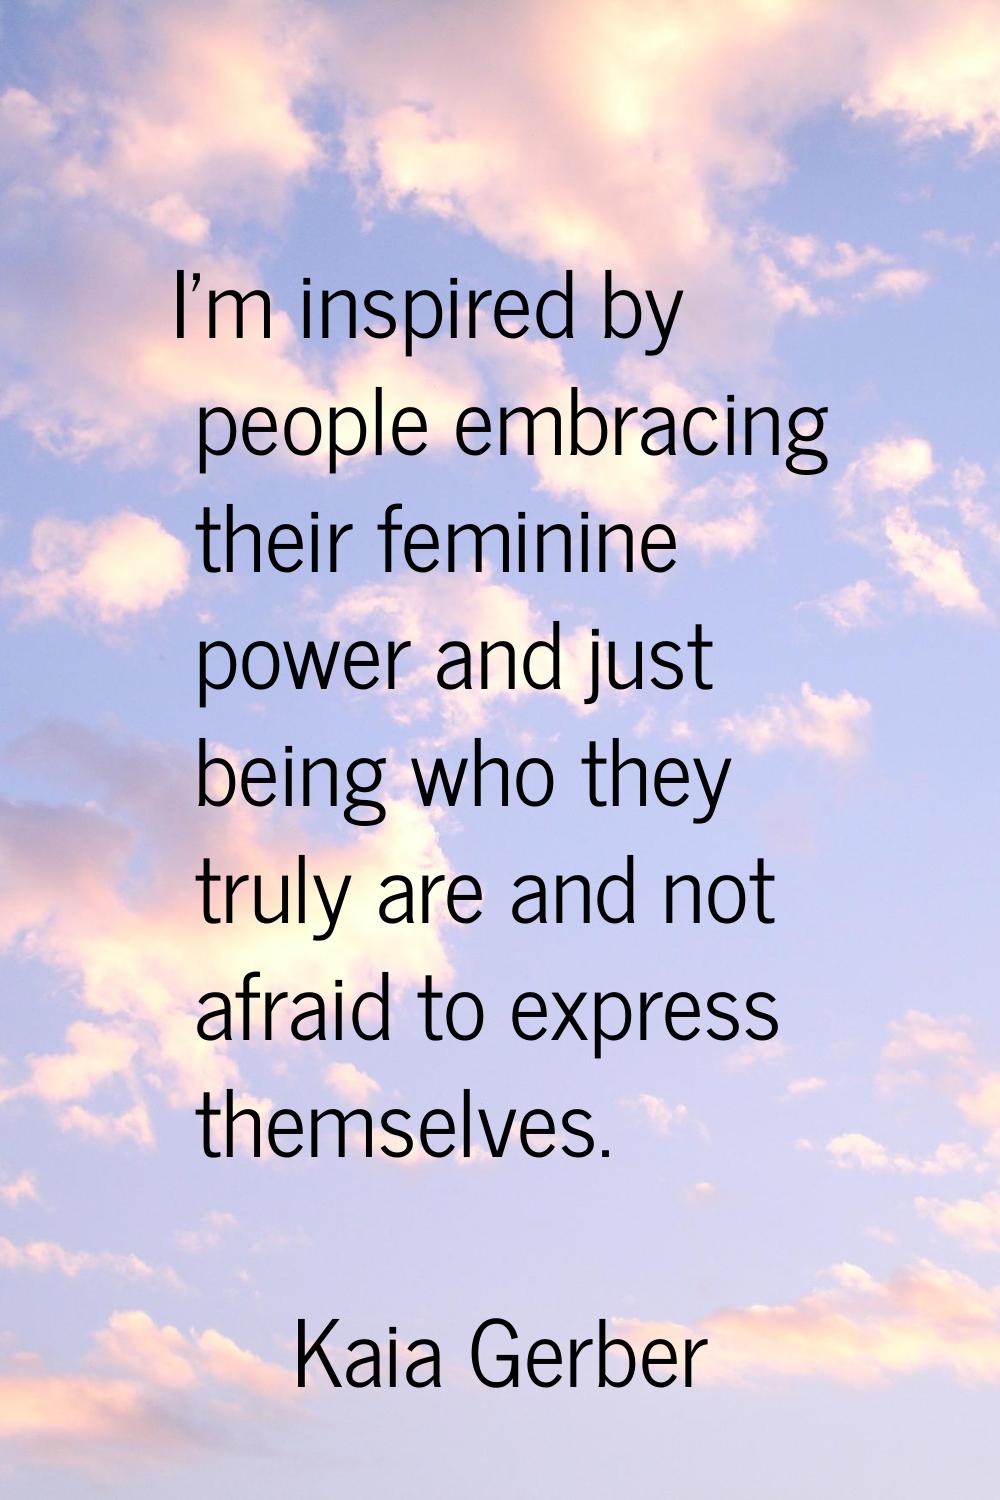 I'm inspired by people embracing their feminine power and just being who they truly are and not afr